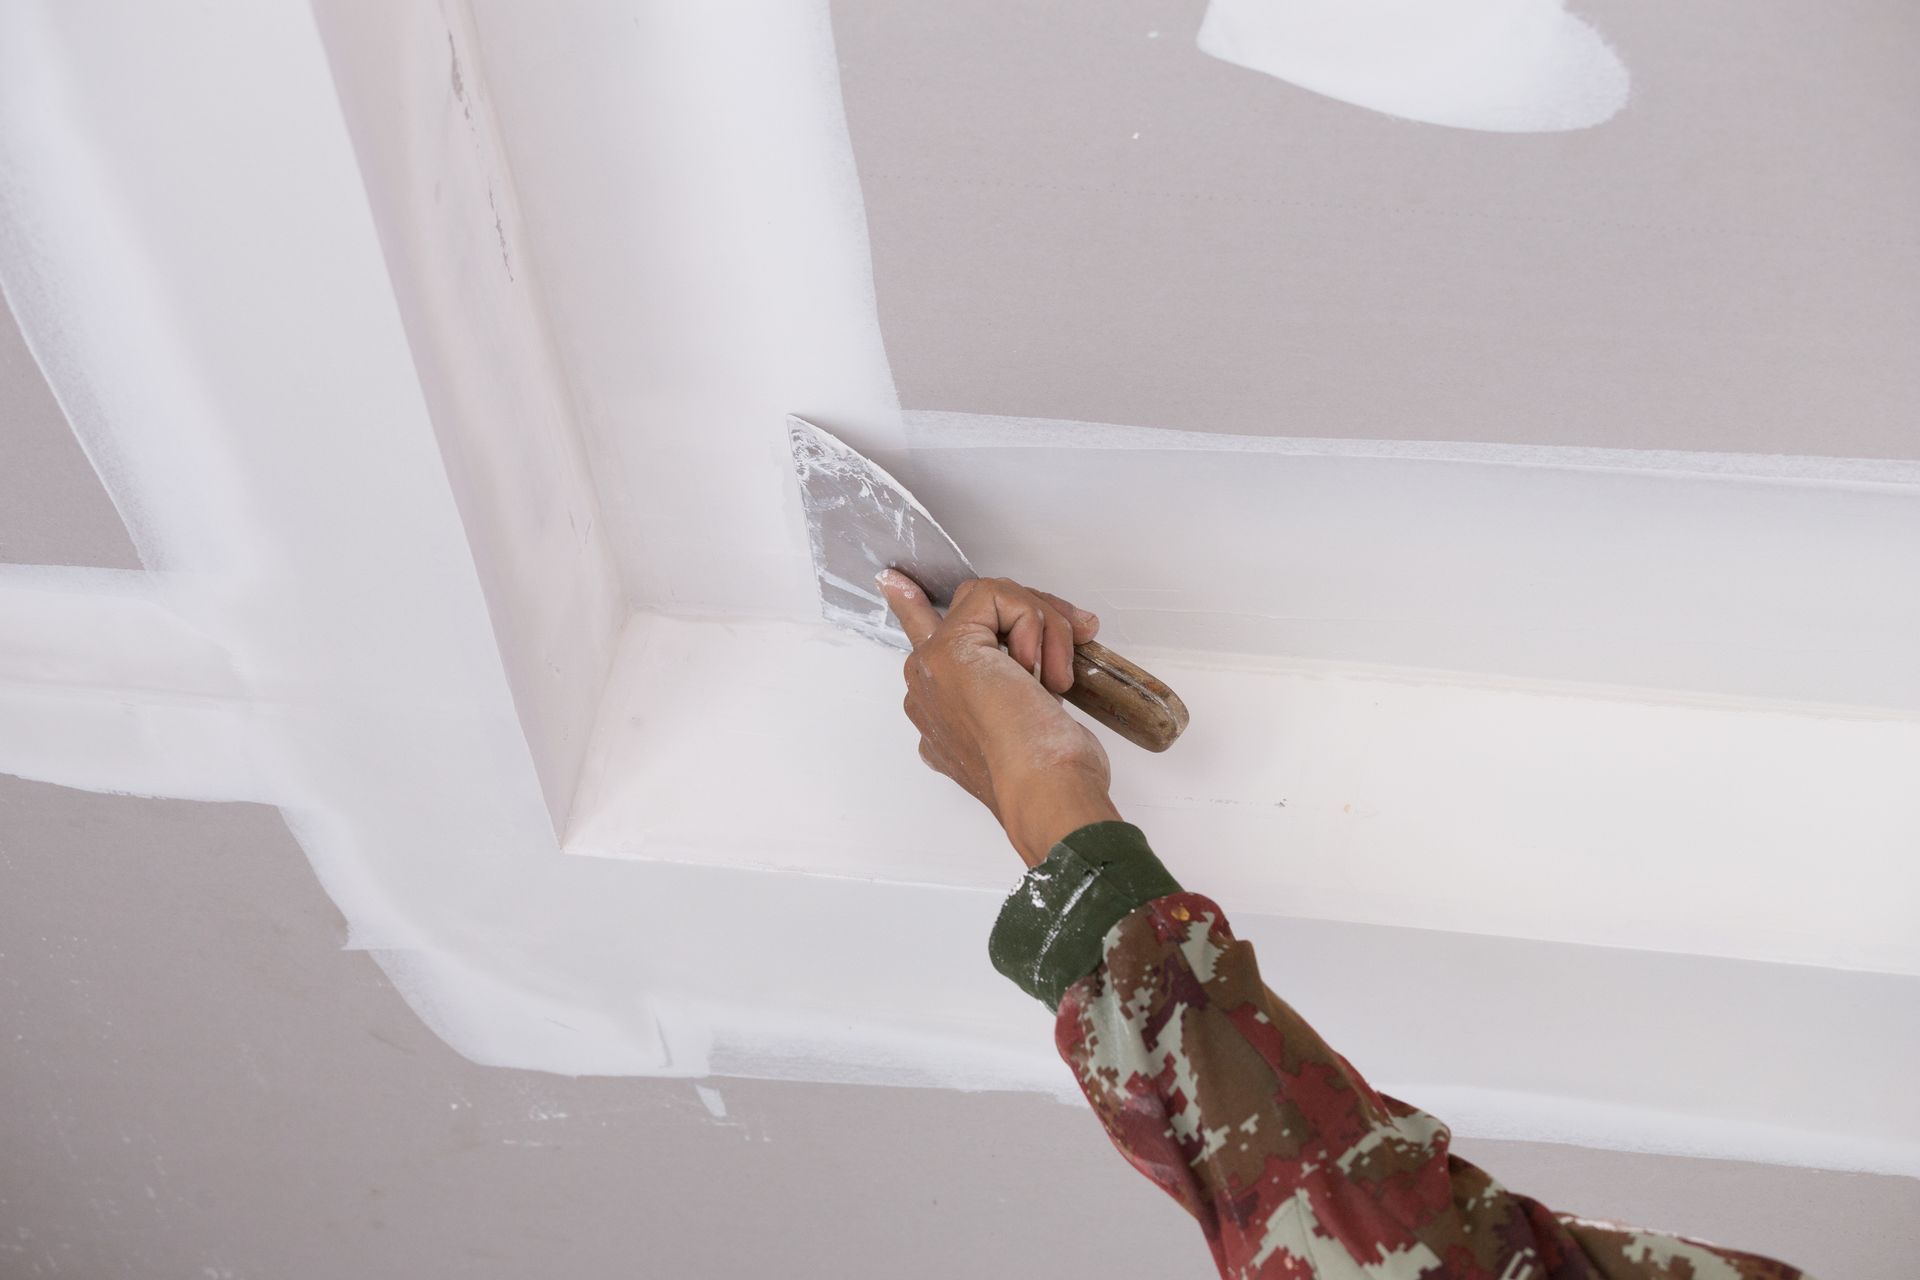 A person using a putty knife to apply joint compound over a crack in a sheetrock wall.